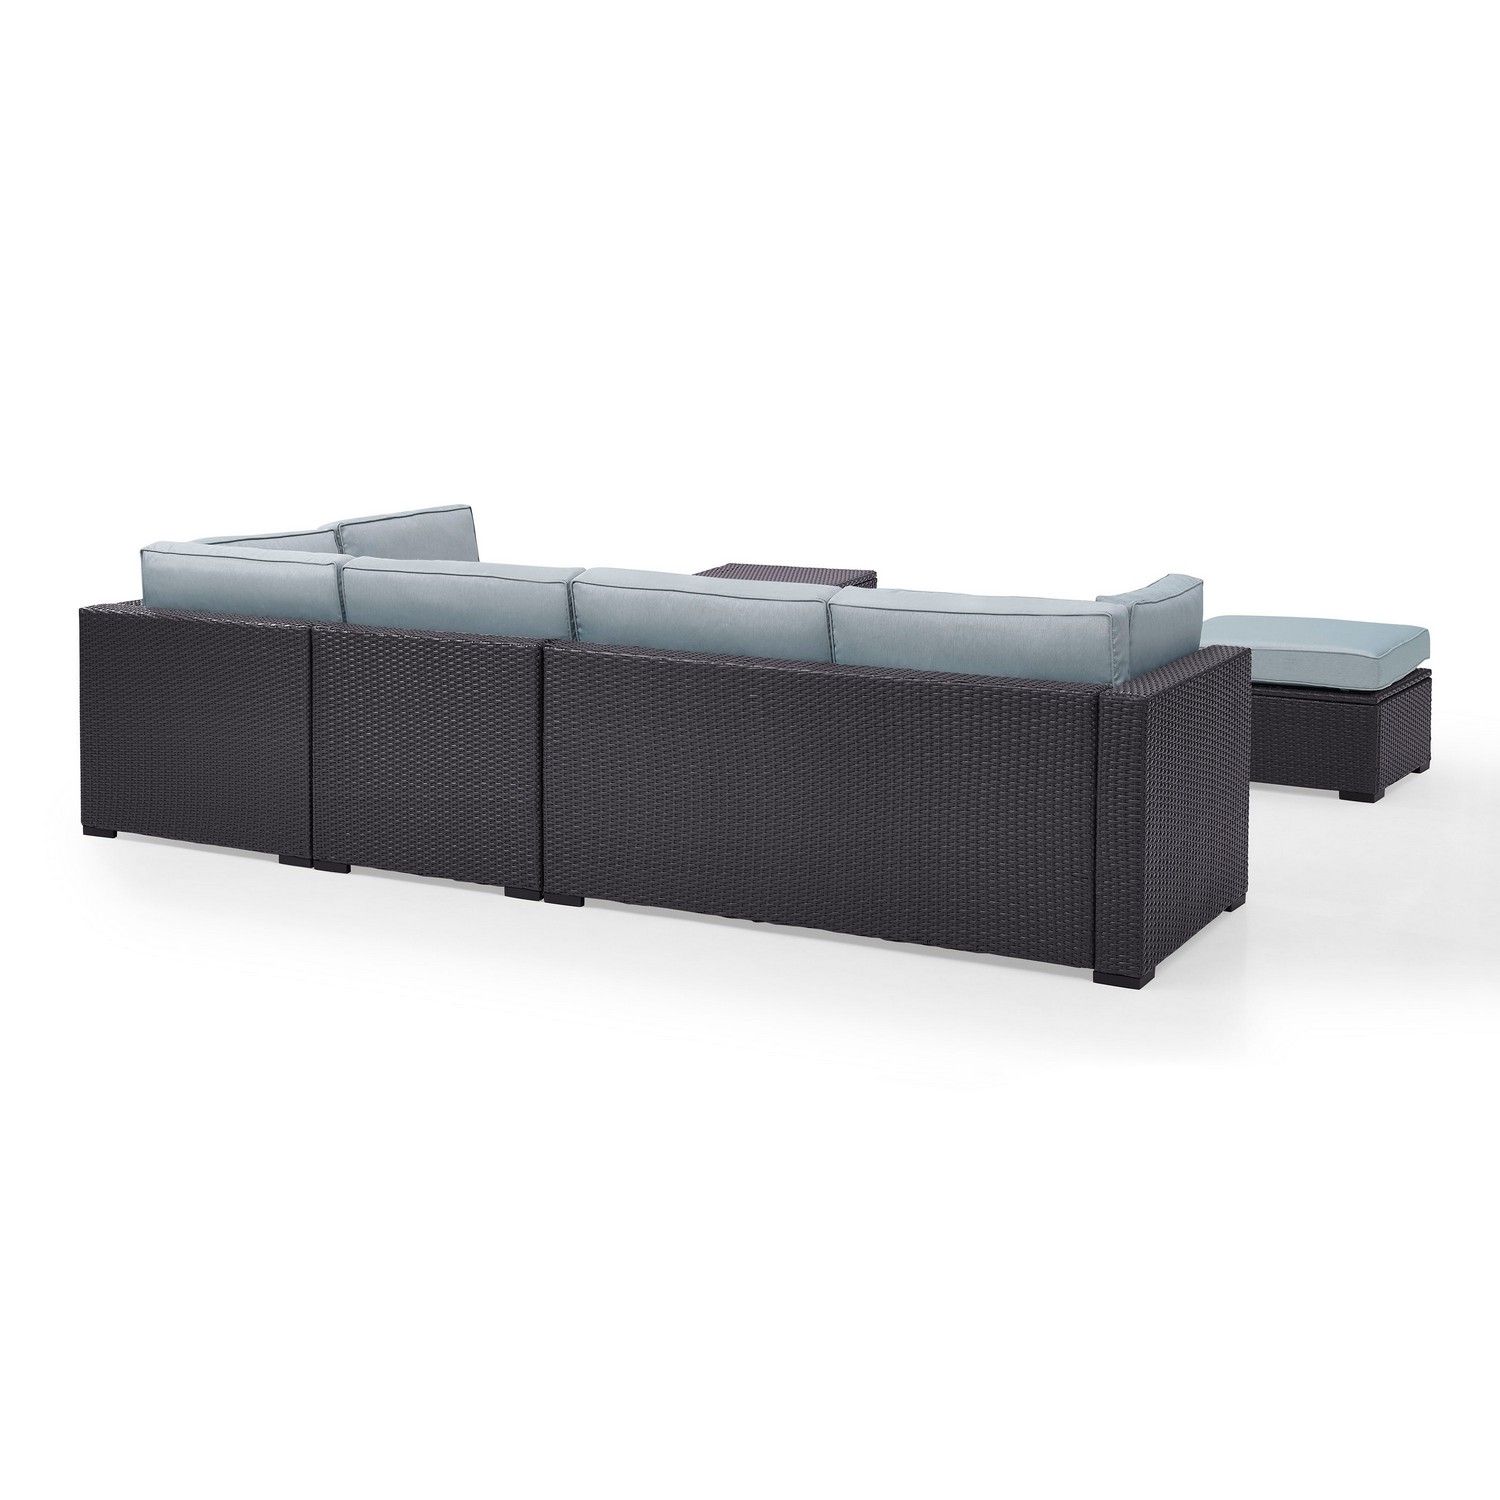 Crosley Biscayne 6-PC Outdoor Wicker Sectional Set - 2 Loveseats, Armless Chair, Coffee Table, 2 Ottomans - Mist/Brown